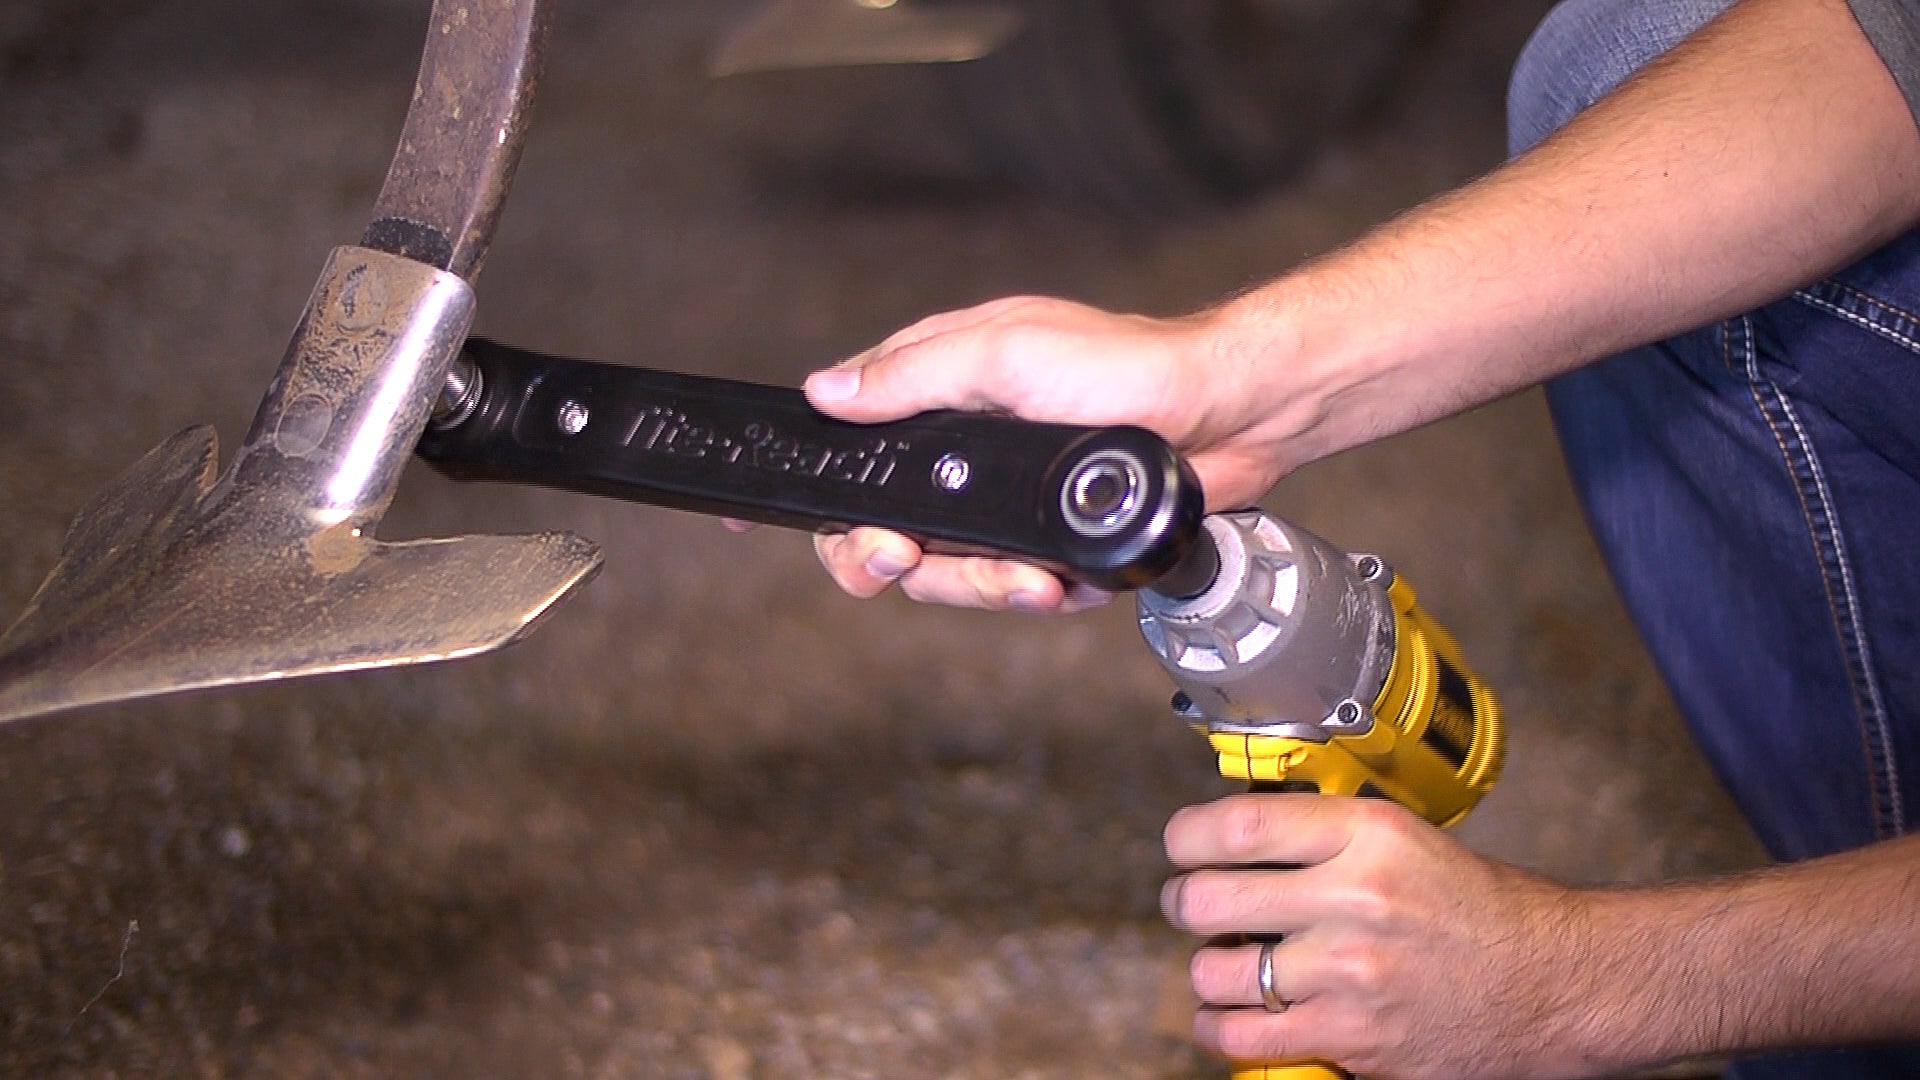 Product Test: Tite-Reach Extension Wrench